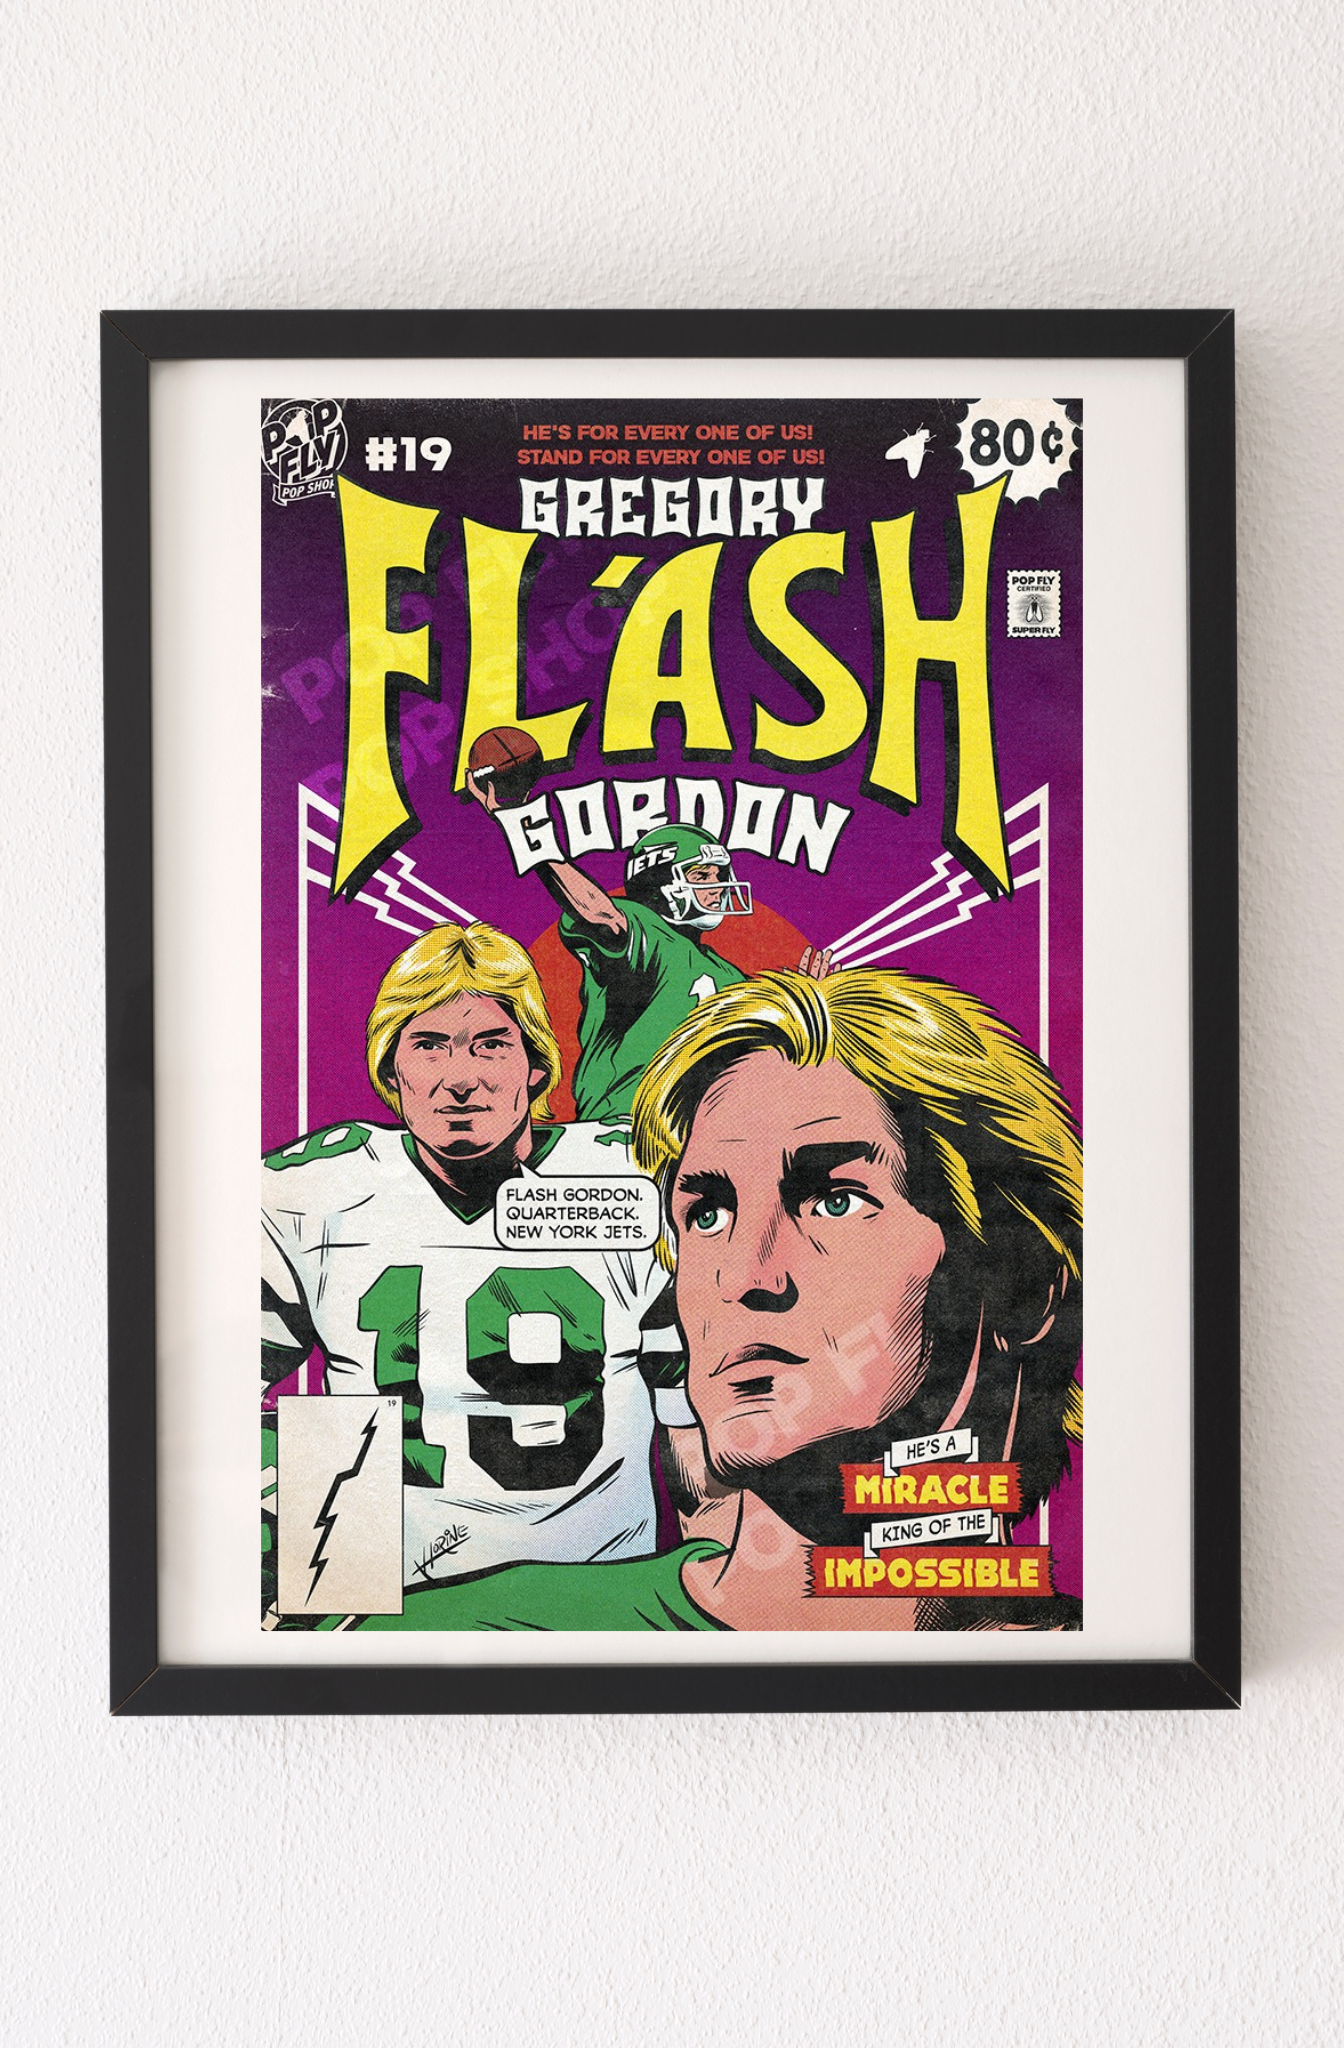 14. (SOLD OUT) "Flash" 7" x 10.5" Art Print